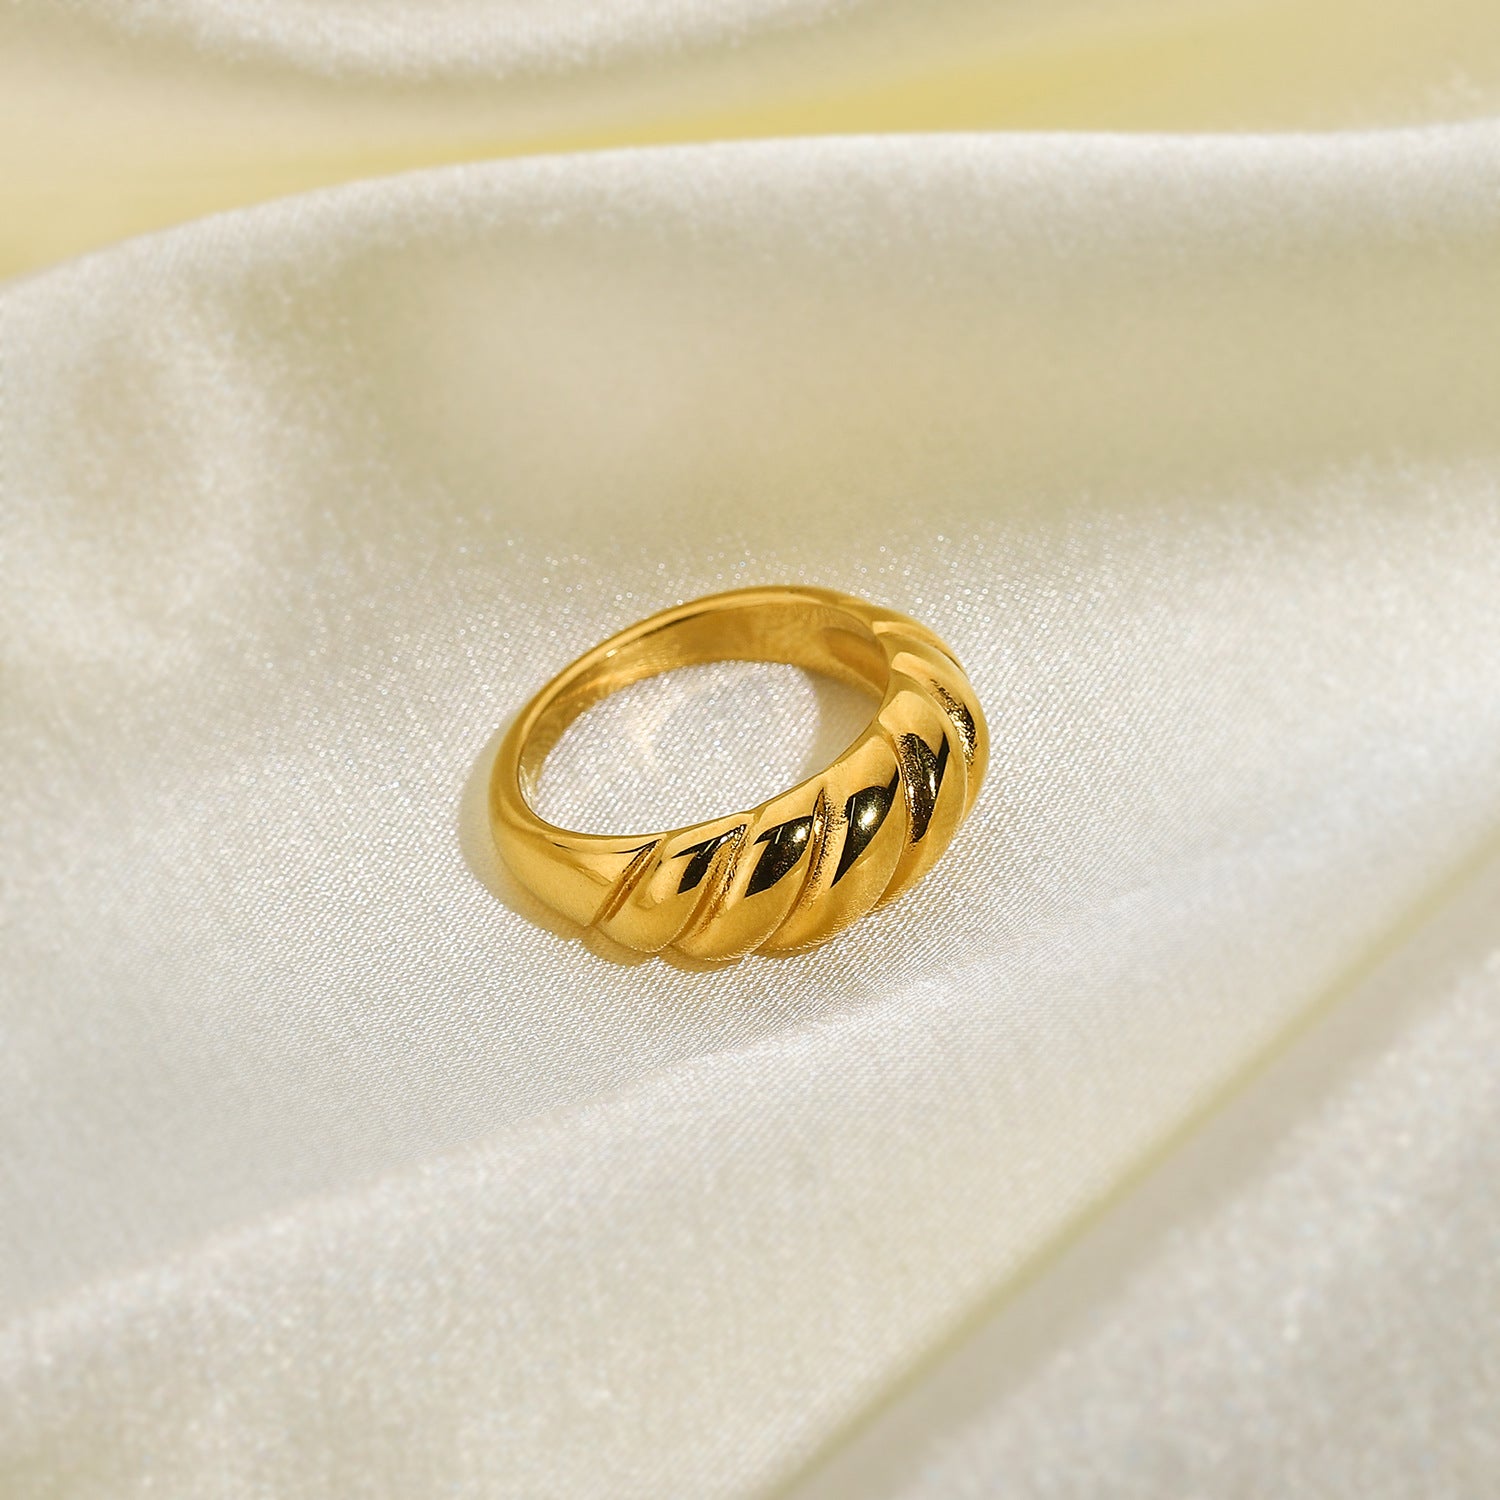 Buy Twisted 18k Gold Ring, Gift for Her, Index Figure Ring, Ring for Women,  Twisted Ring, Gift for Her, Gift for Girlfriend, Valentine Day Gifts Online  in India - Etsy